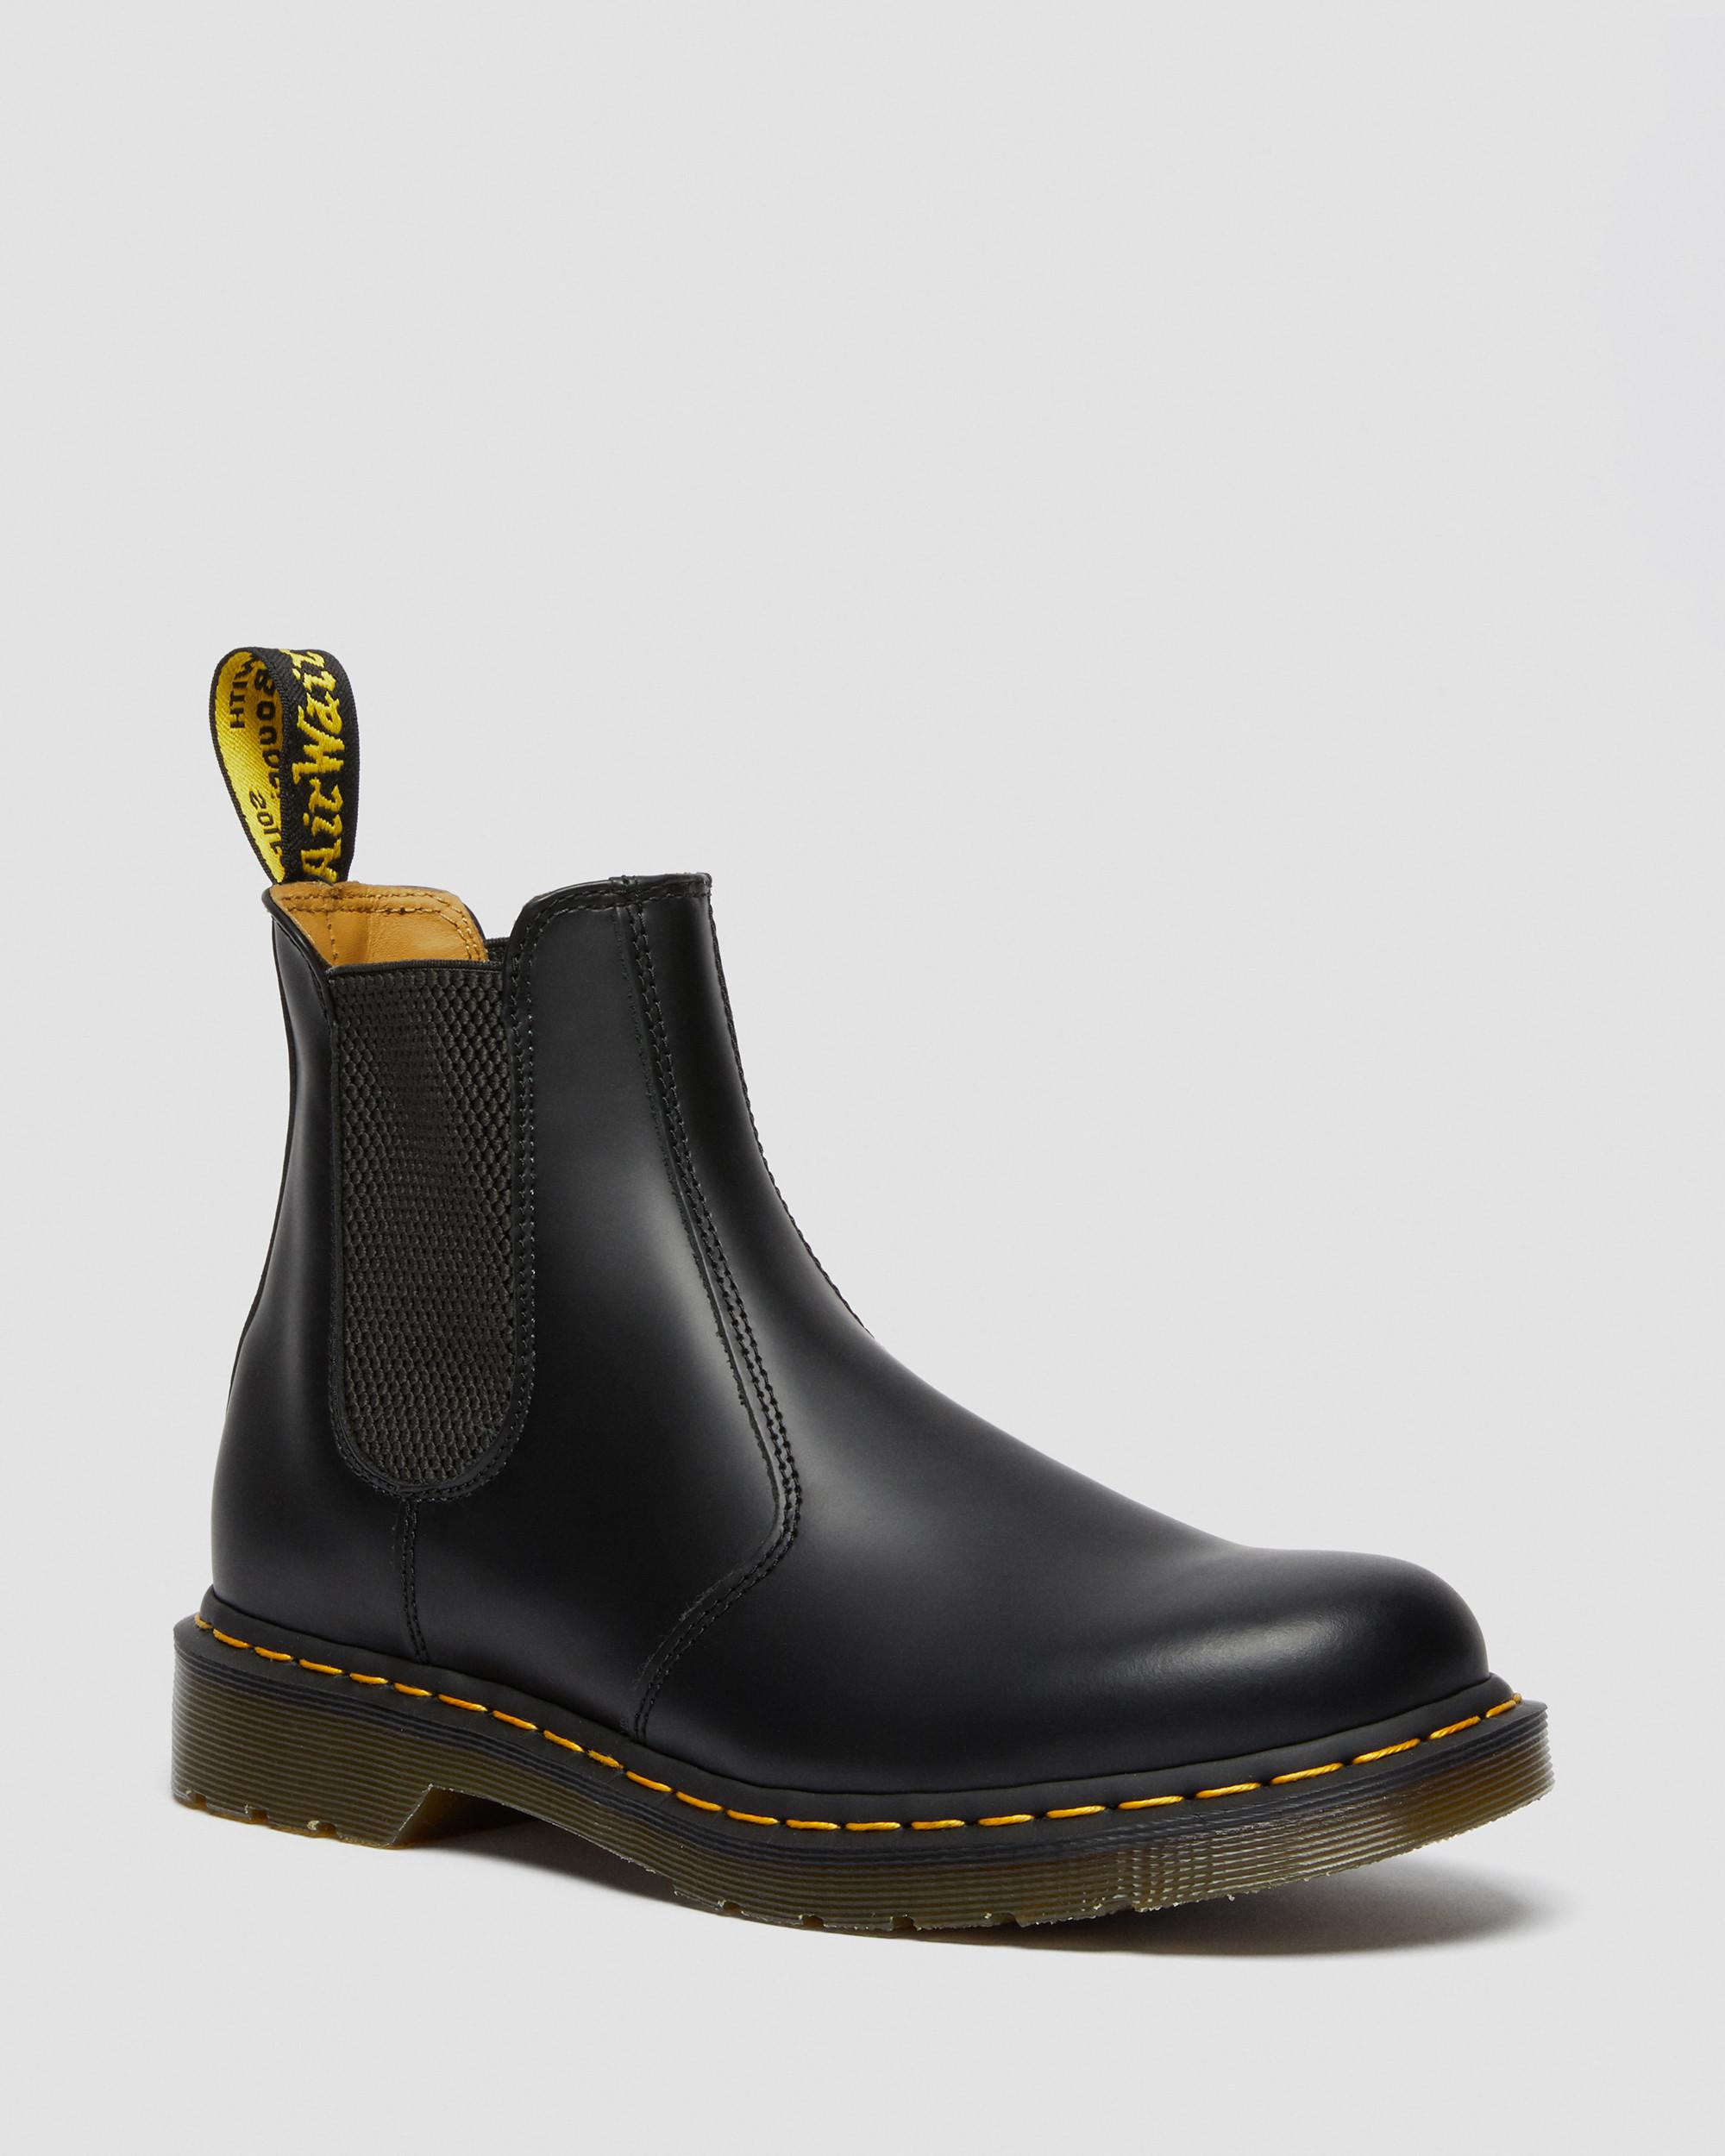 2976 Stitch Smooth Leren Chelsea Boots2976 Yellow Stitch Smooth Leren Chelsea Boots Dr. Martens